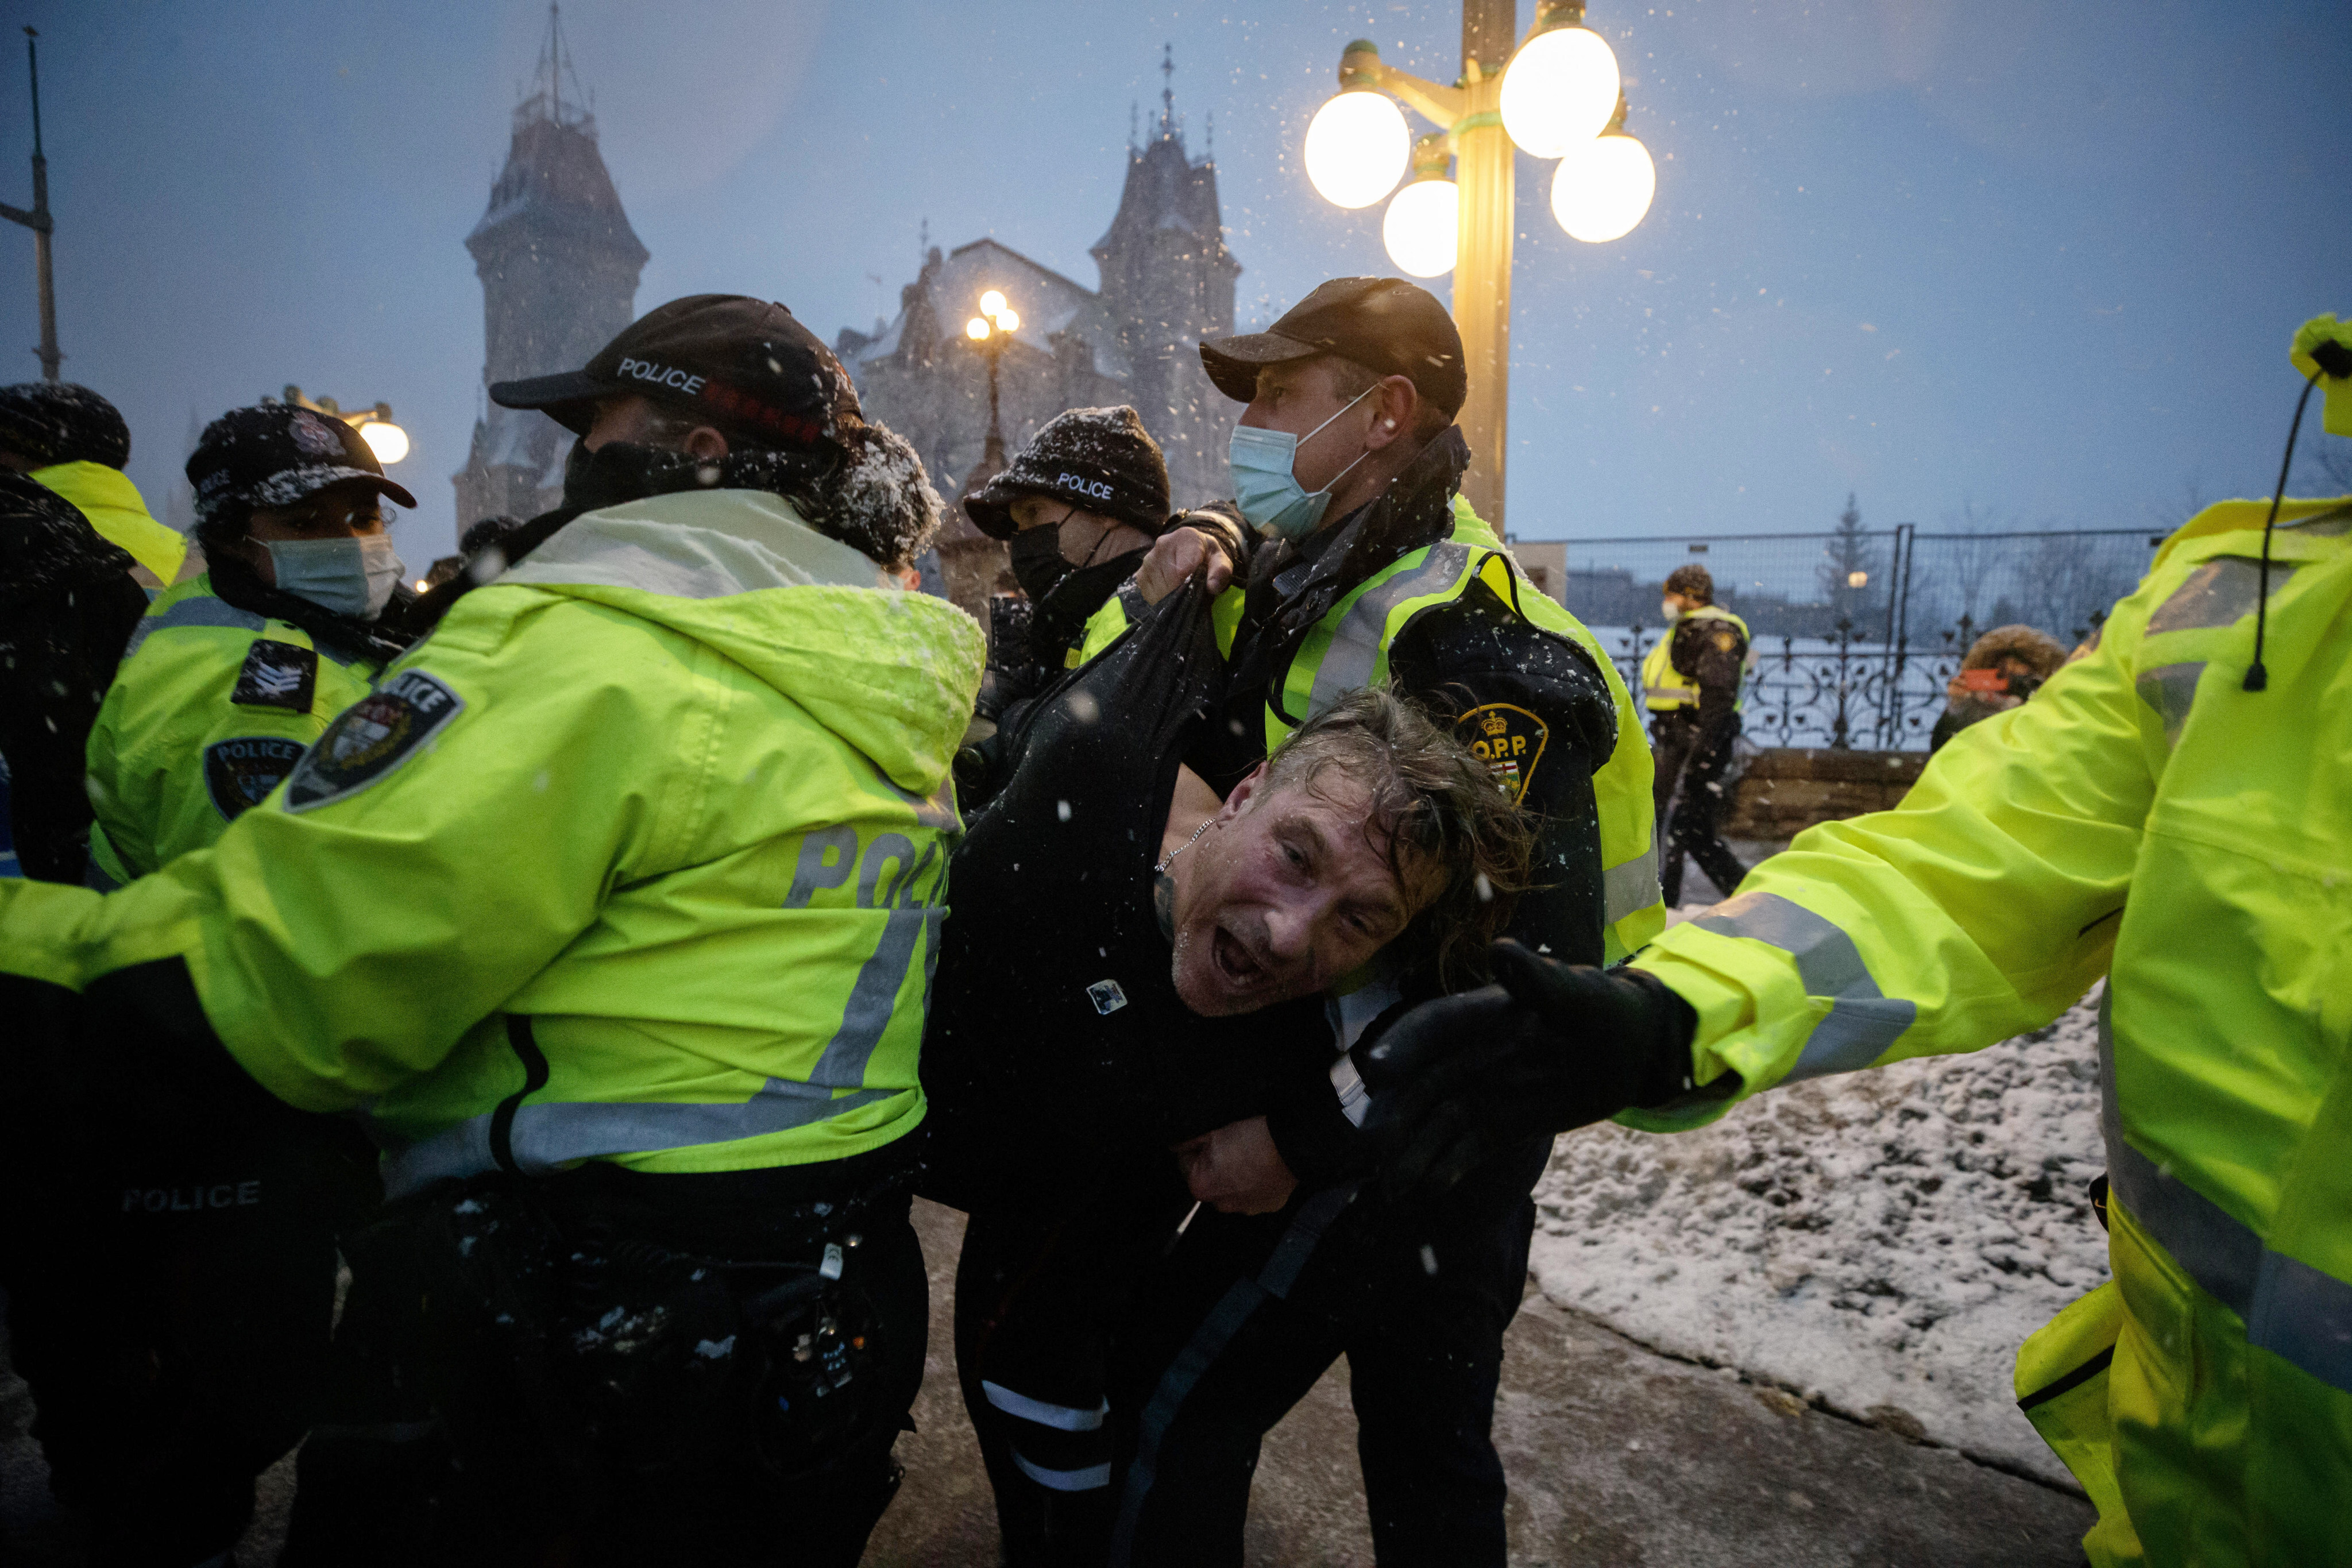 A man is arrested in Ottawa on Thursday as police move in on protesters. Photo: AP